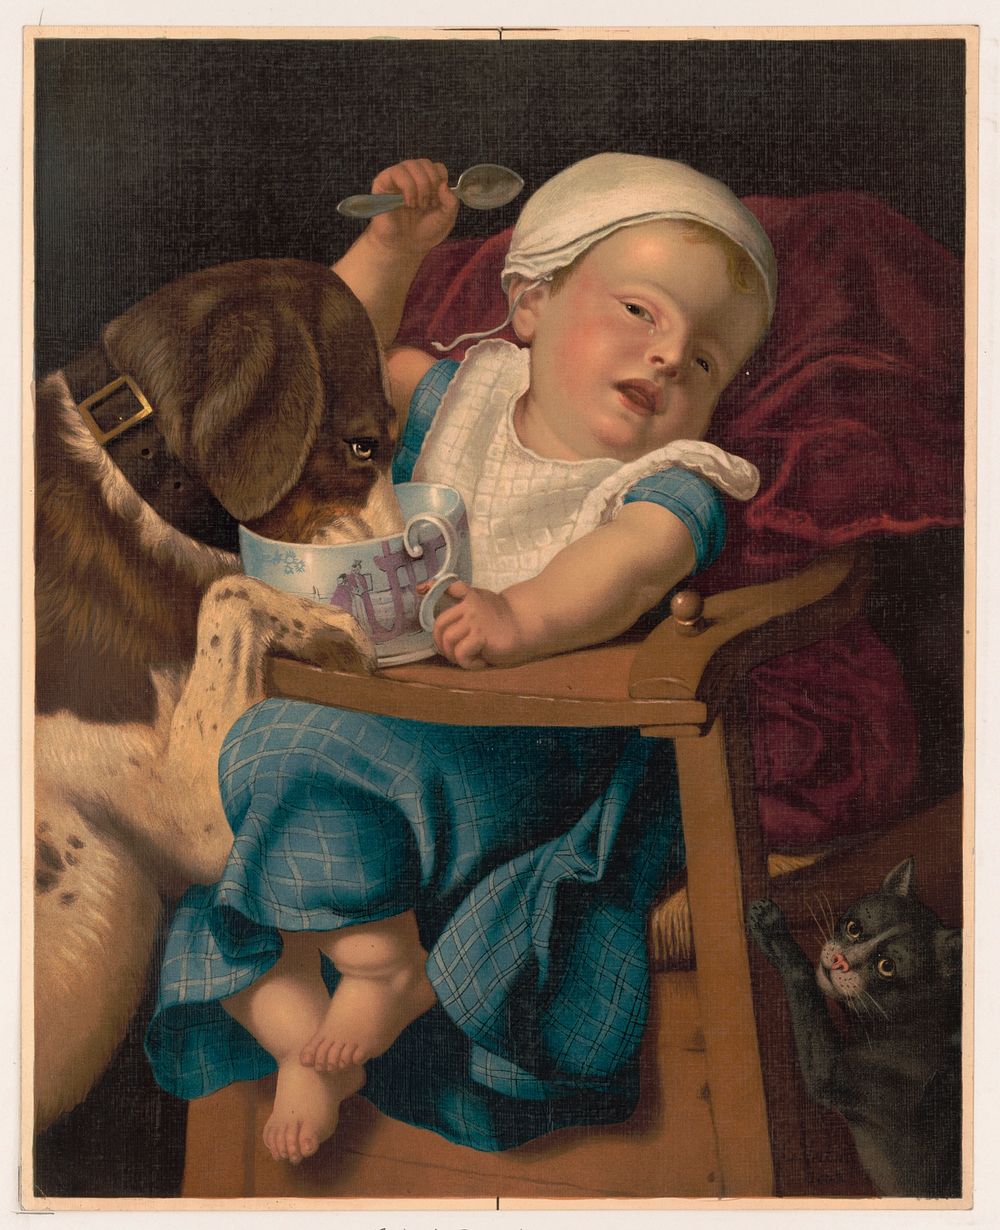 Baby in trouble (1869) by L. Prang & Co.